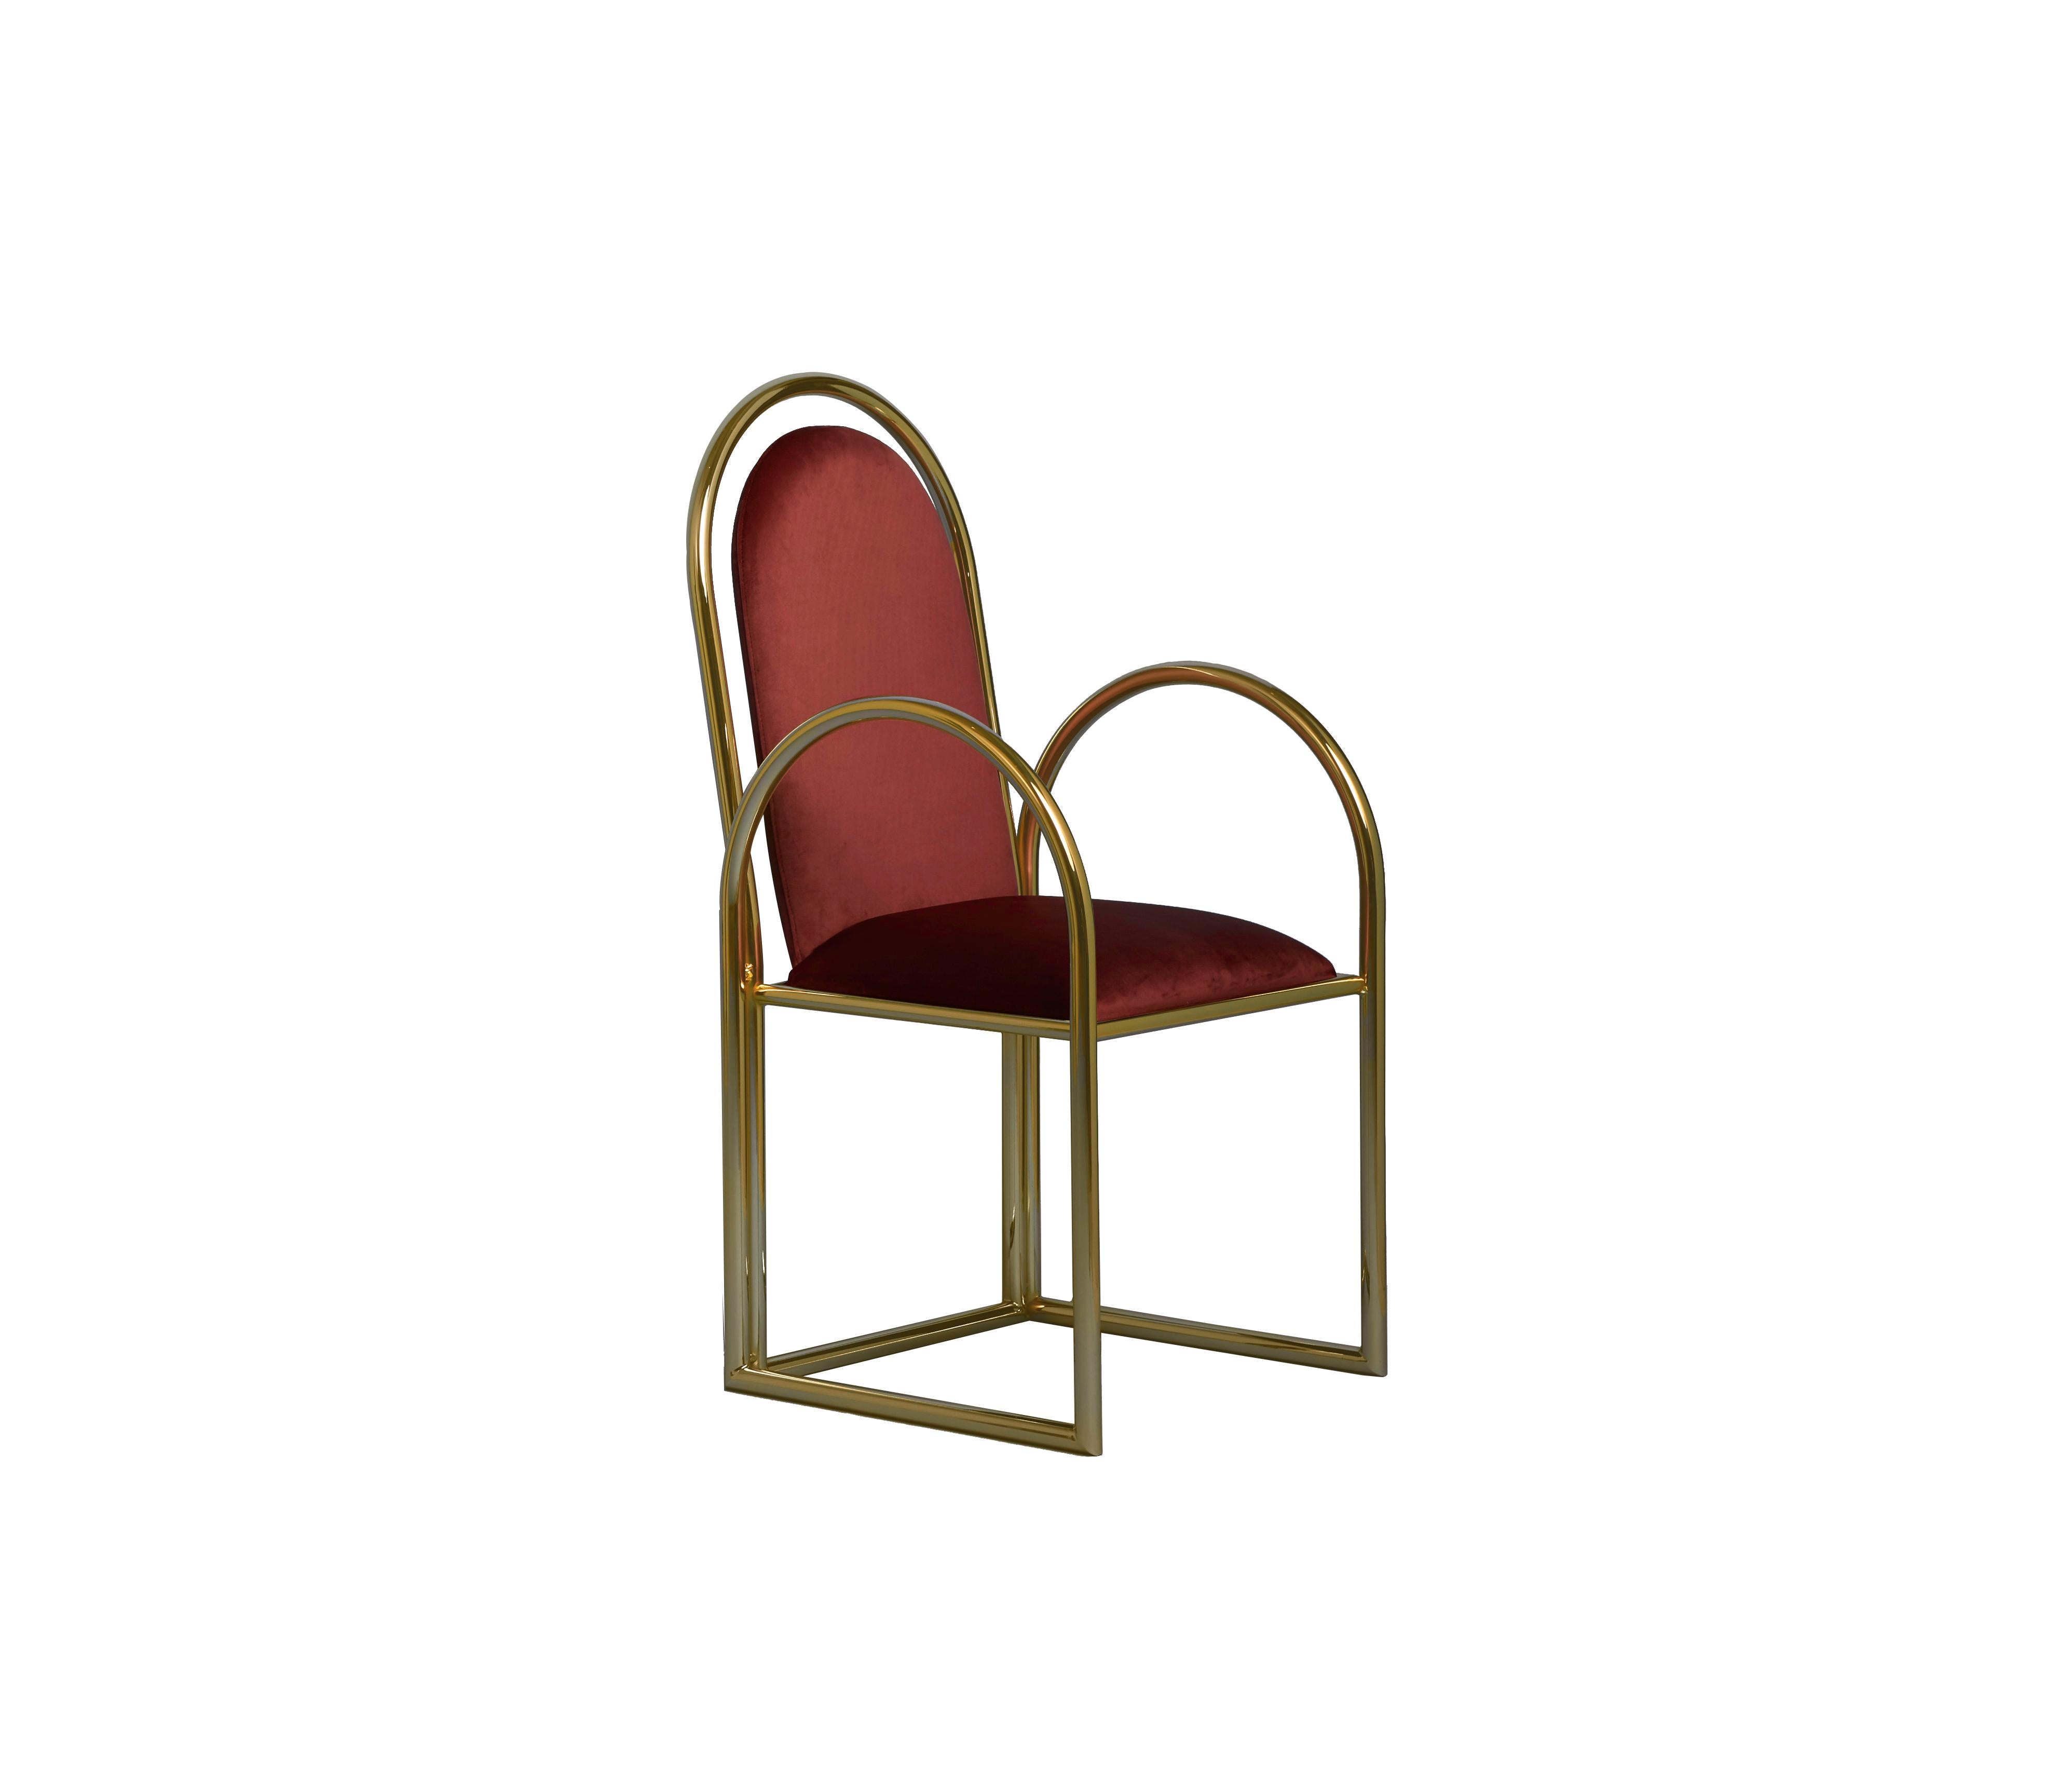 Modern Arco Chair by Houtique